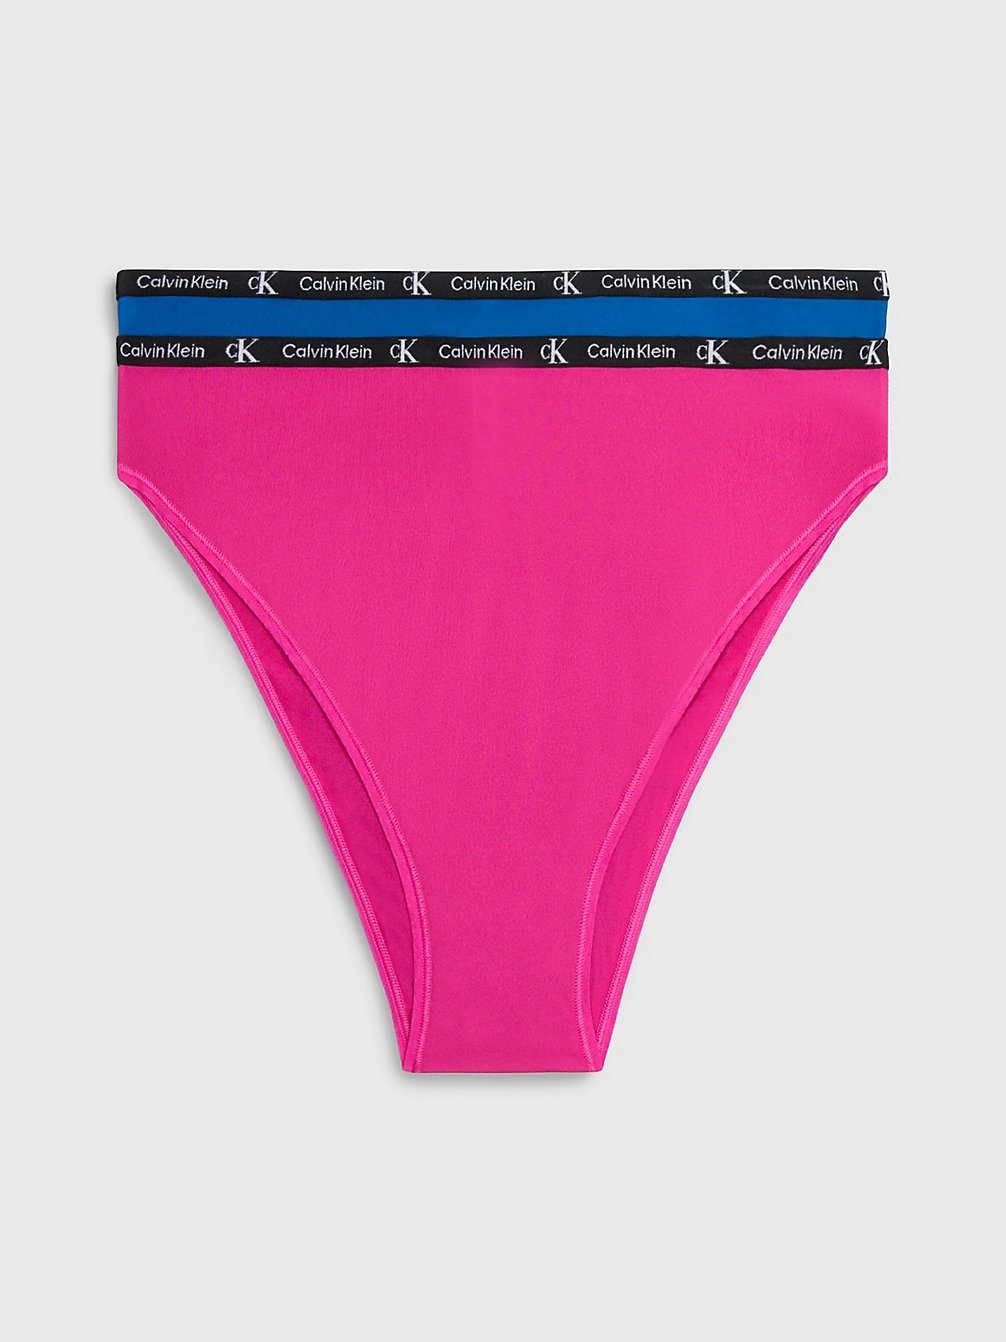 Pack De 2 Tangas De Talle Alto - Ck96 > AMP BLUE/PALACE PINK > undefined mujer > Calvin Klein